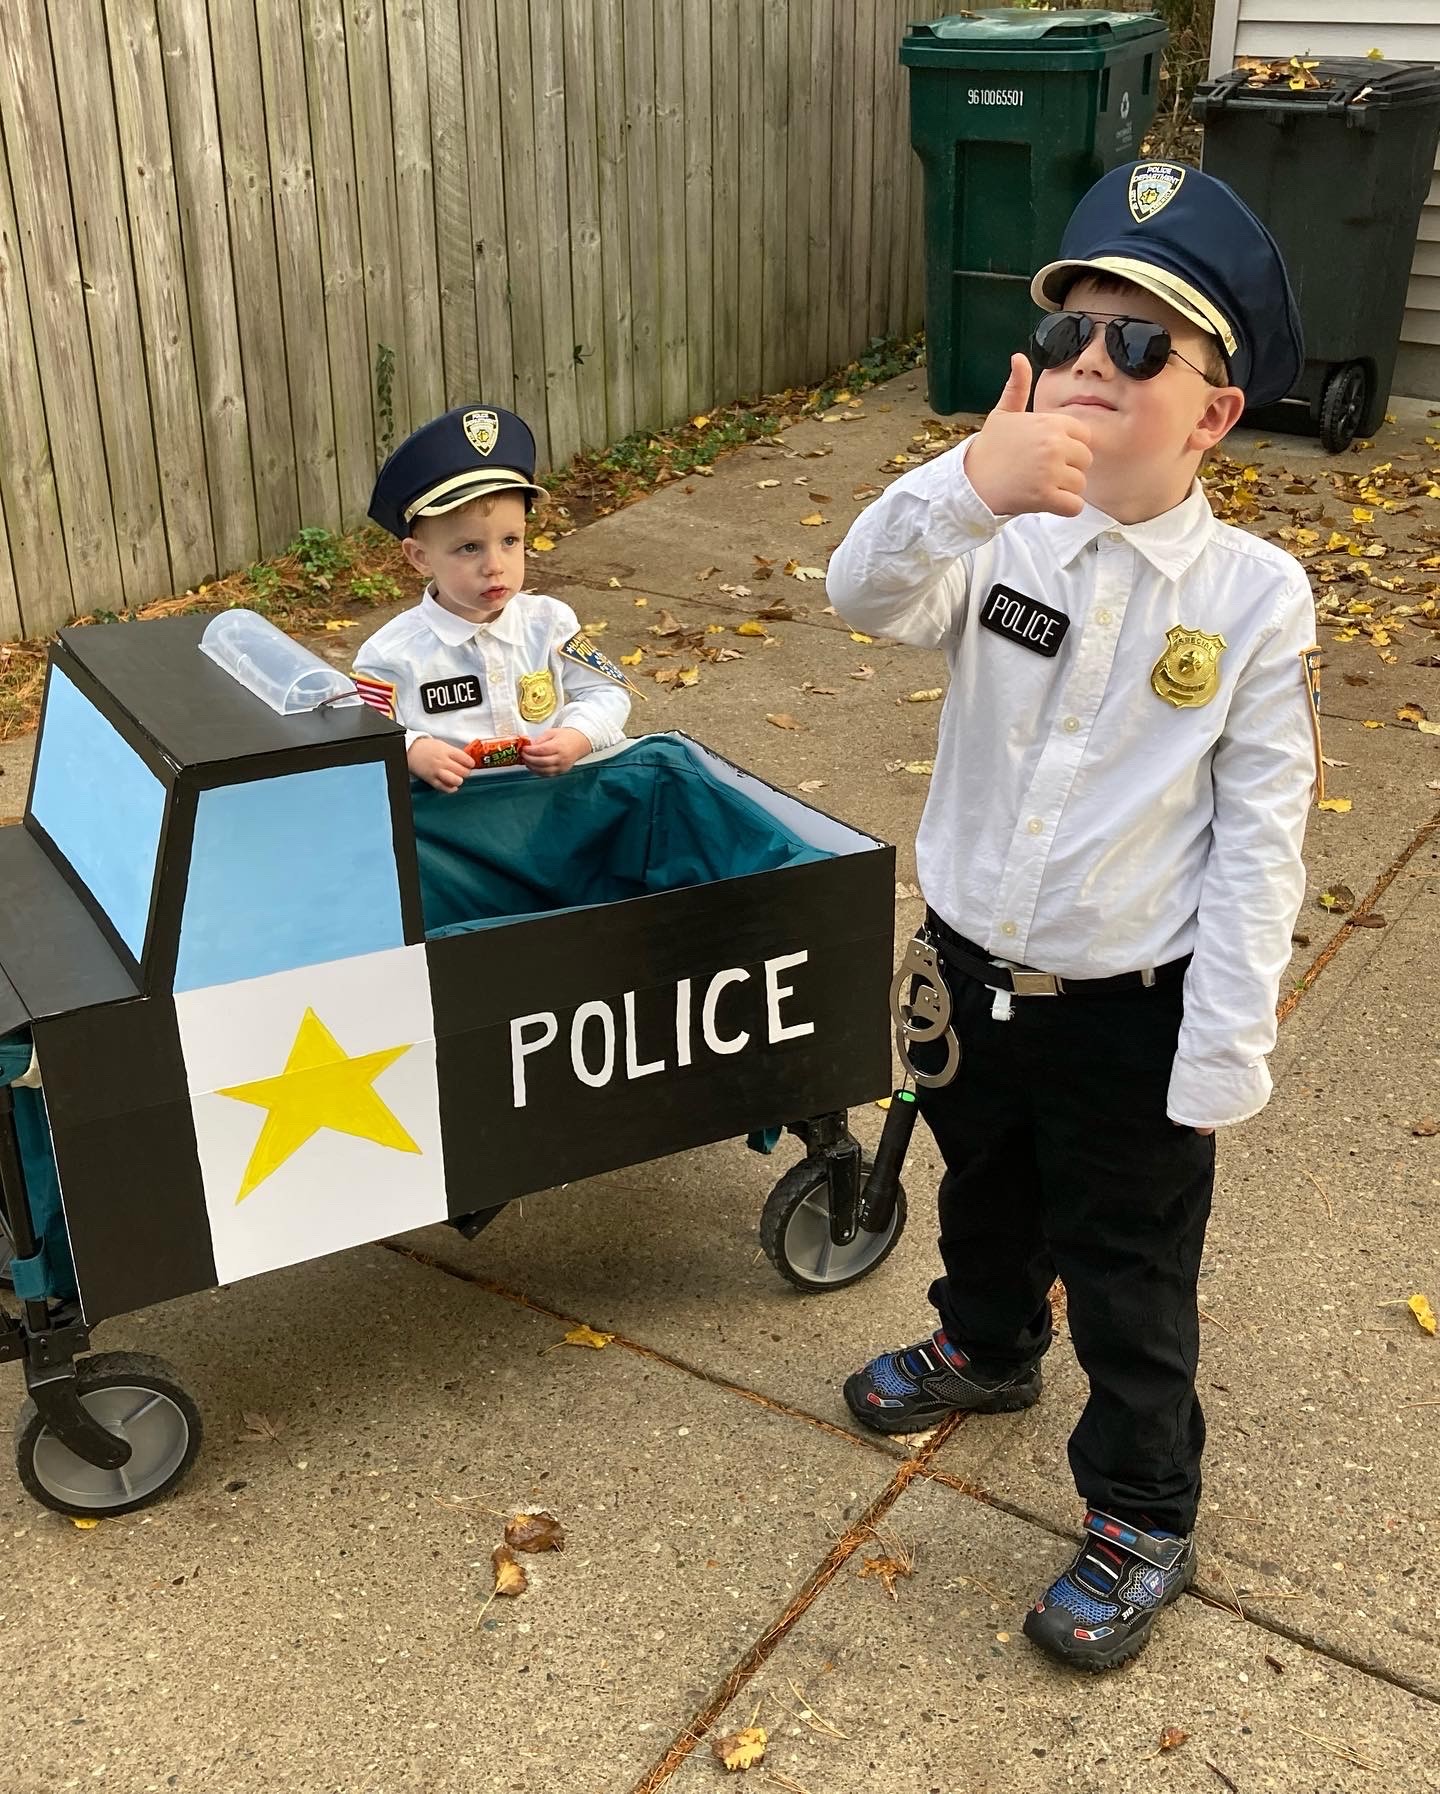 Two children dressed up like officers with child sized police car